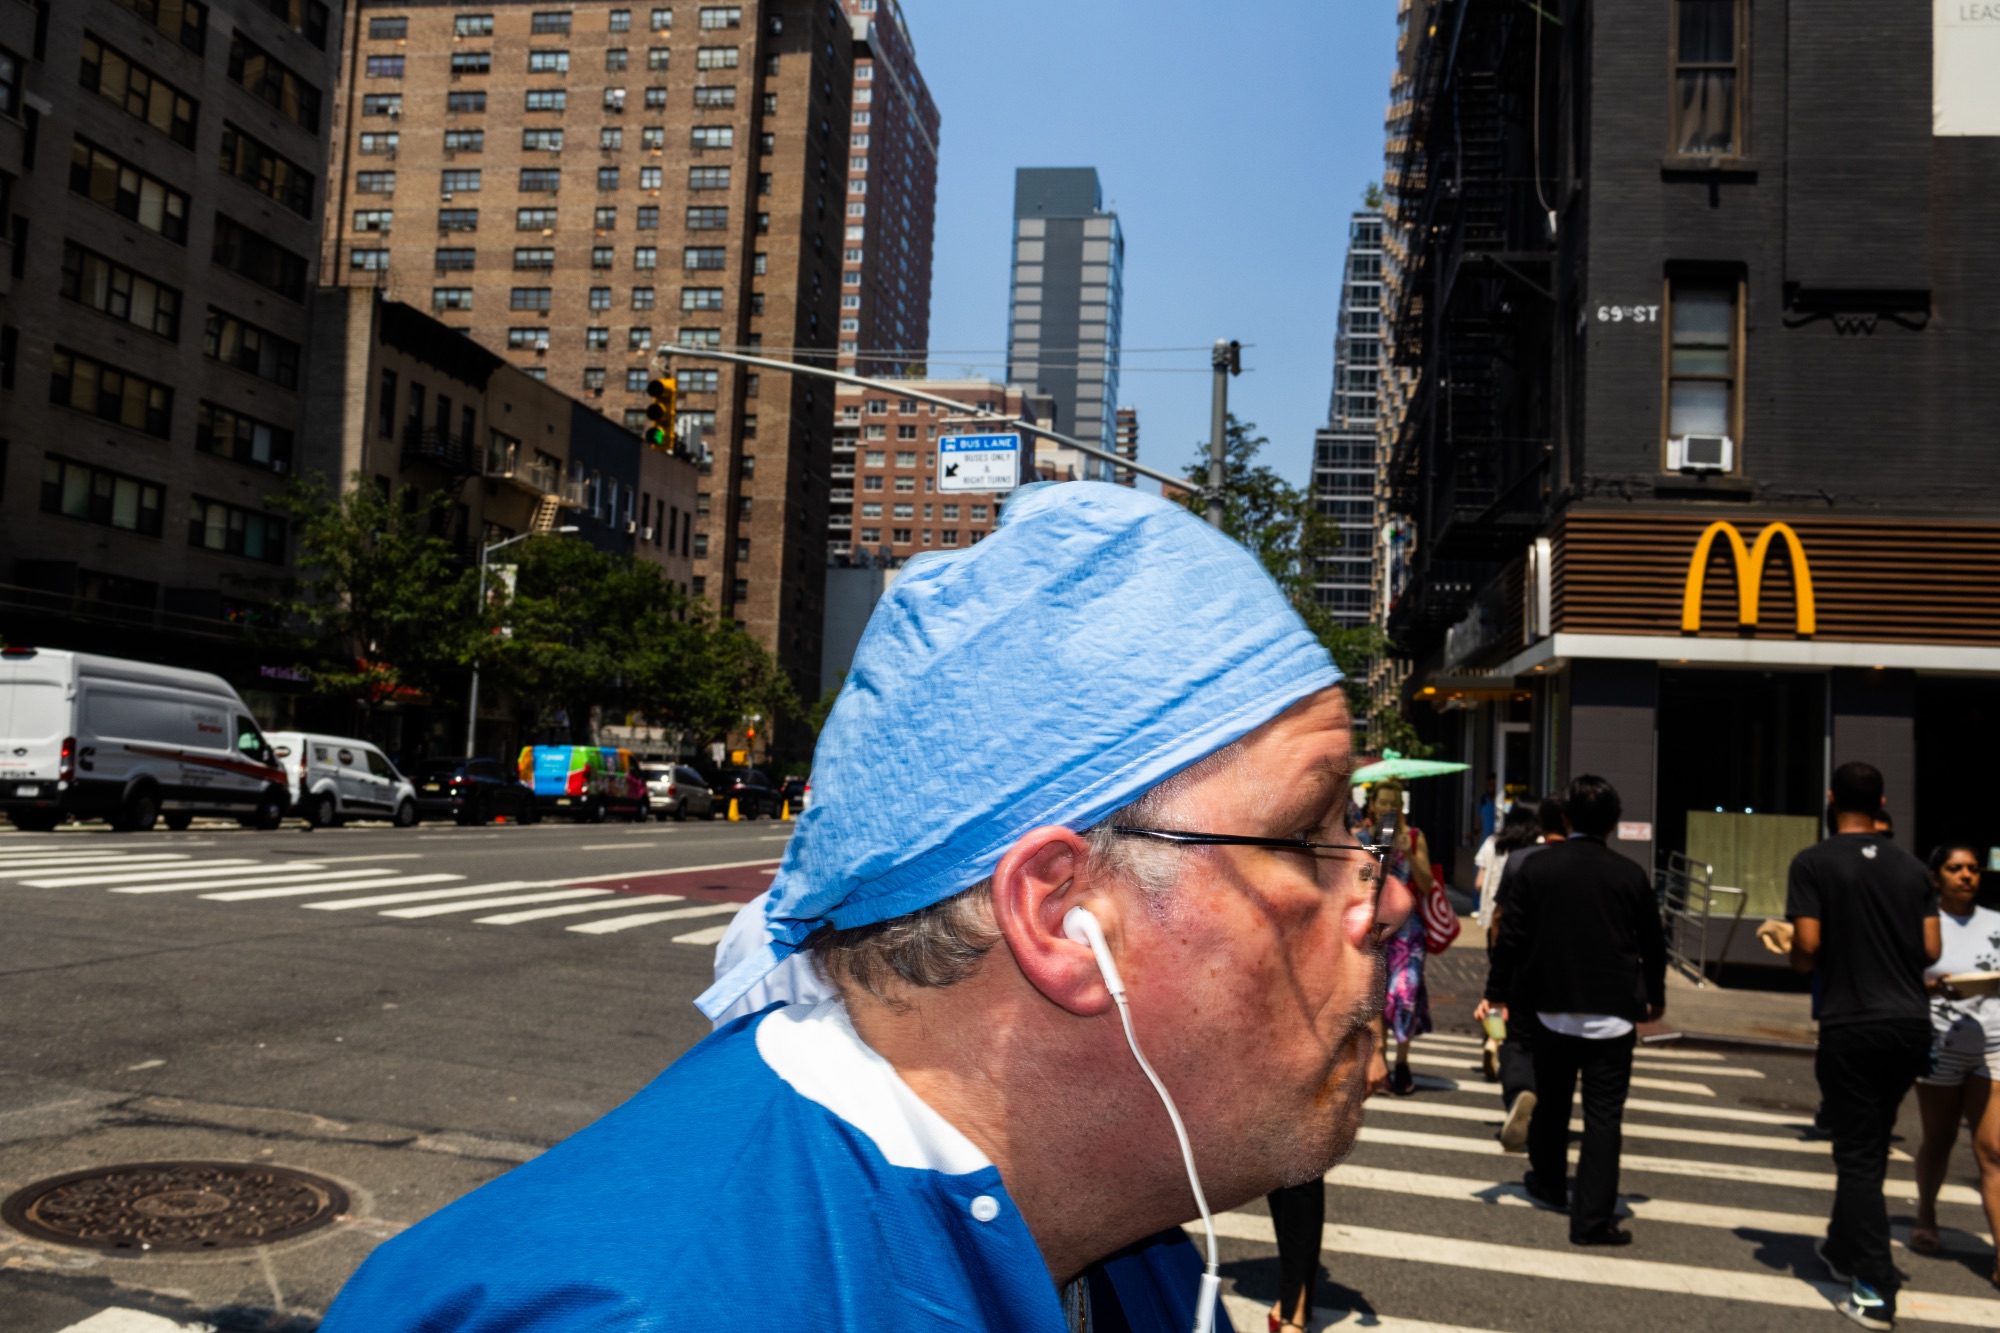 A medical worker with earbuds walks on 69th Street in the Grief Corridor.